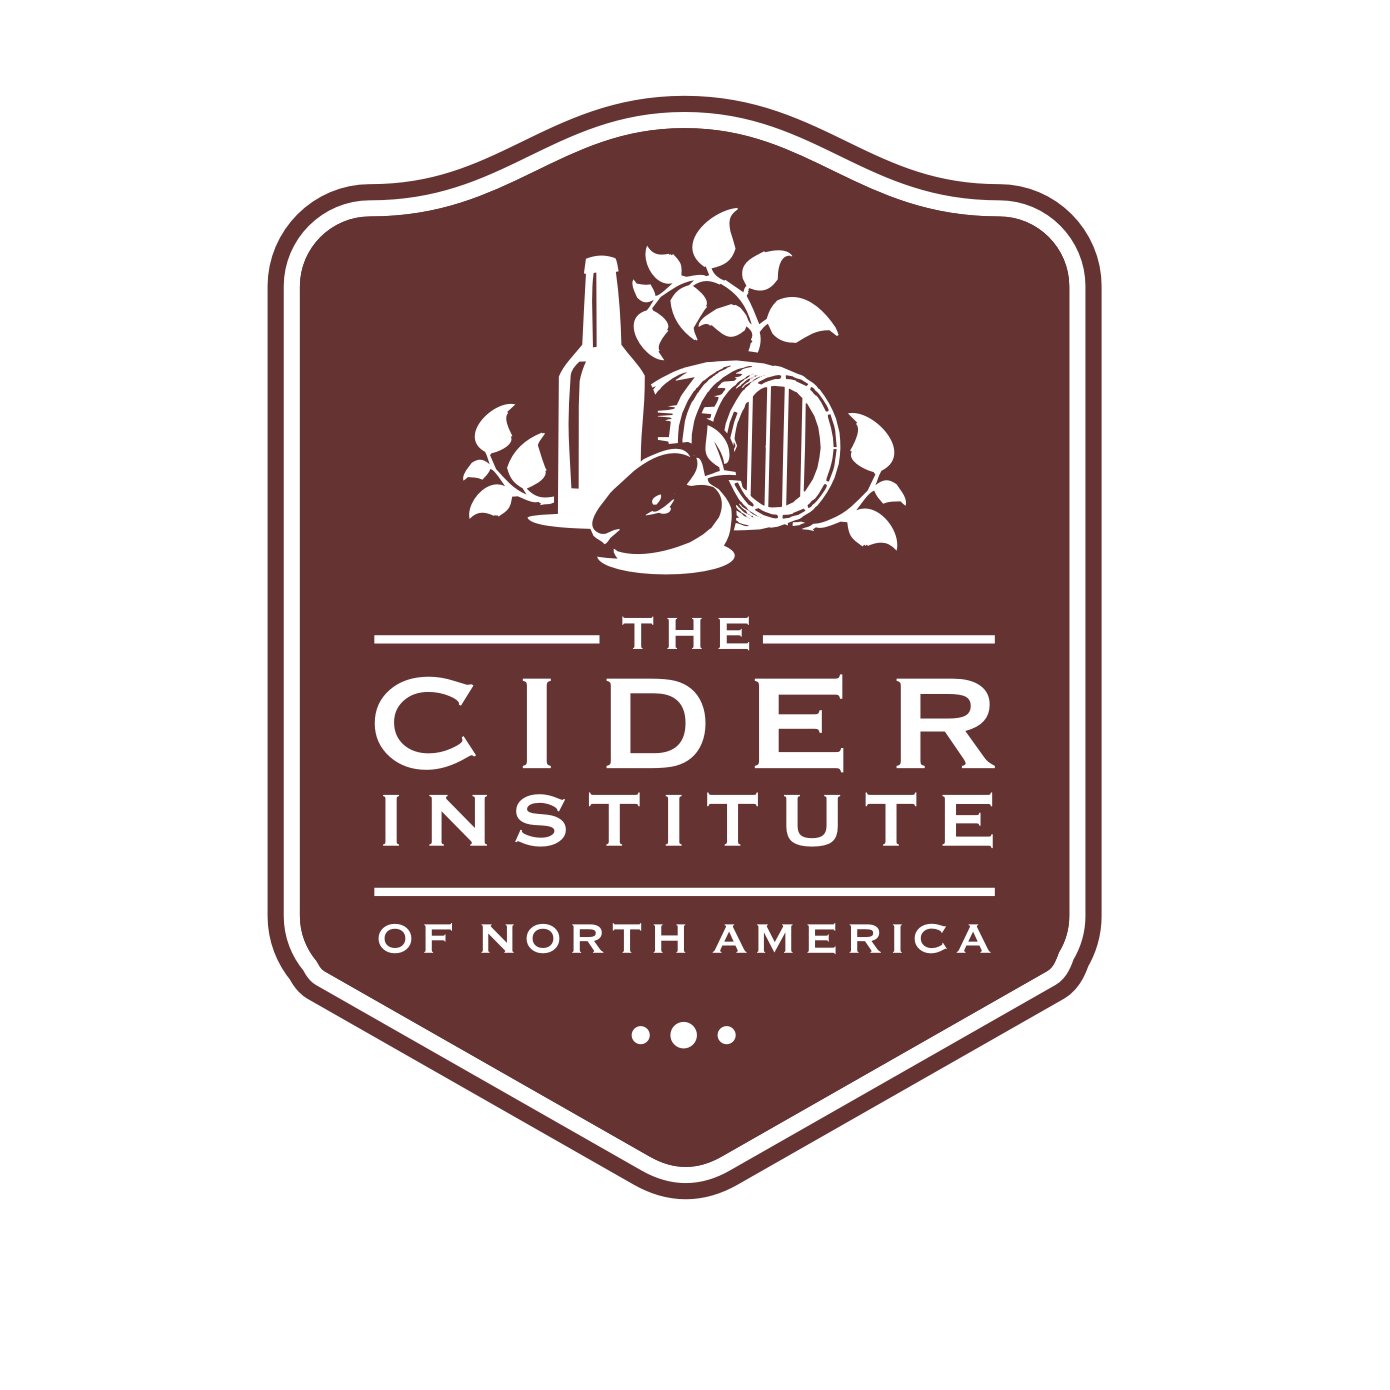 We advance the art of cider making by providing educational, training and business development resources to cider makers and the cider industry.